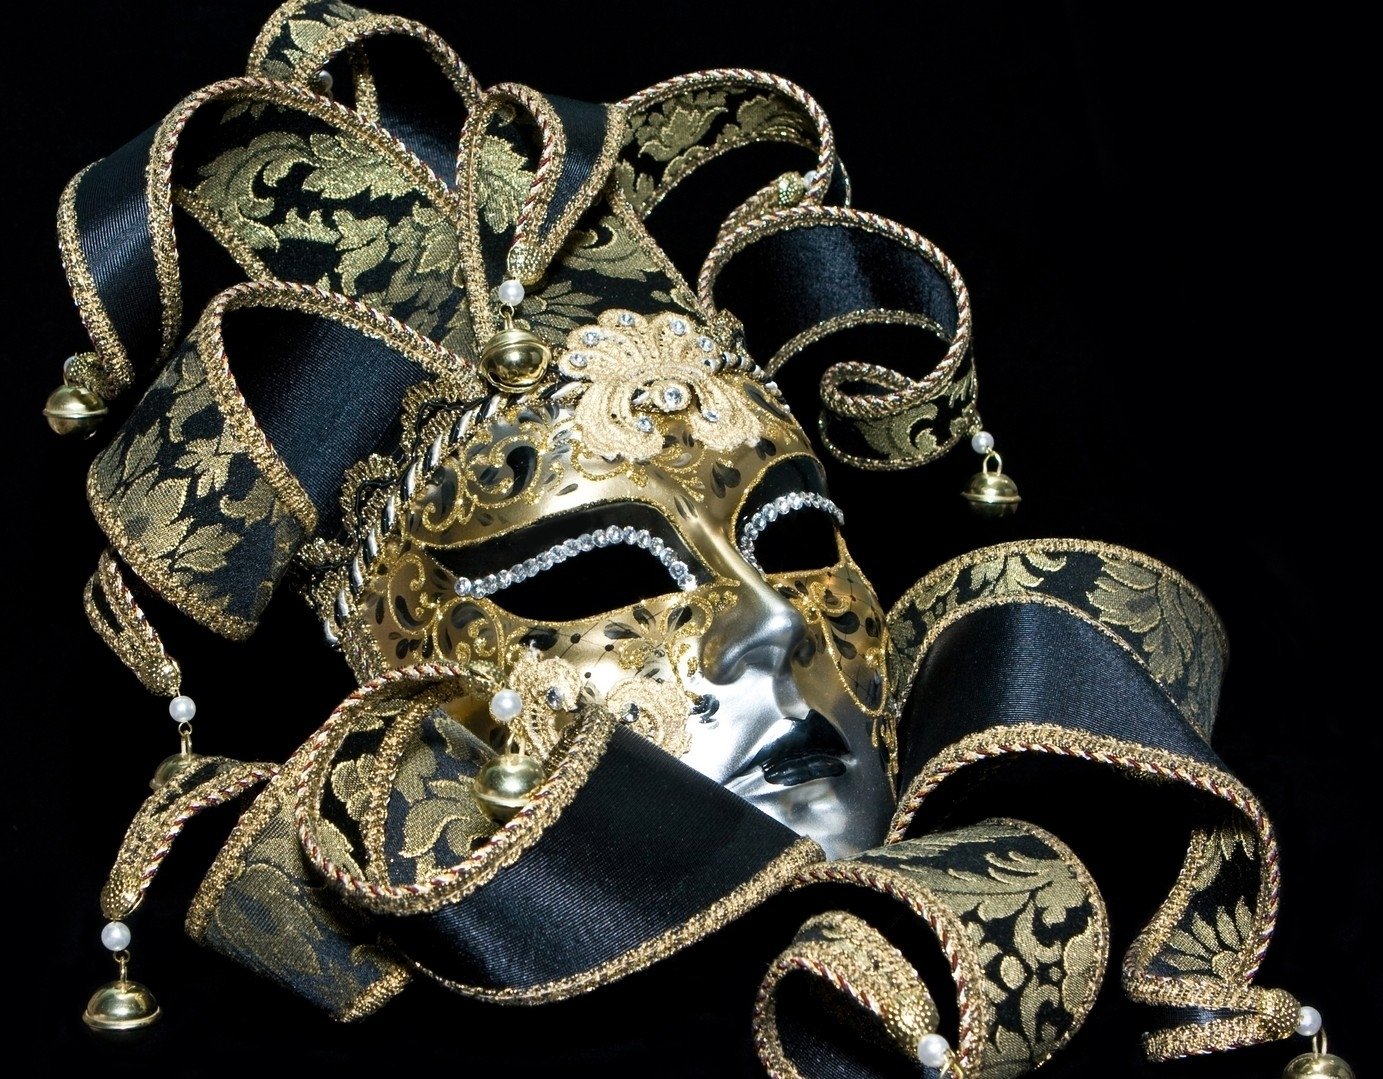 Mask Masquerade Google image from http://www.wallpapersshop.net/wp-content/uploads/2012/12/Mask-Masquerade.jpg